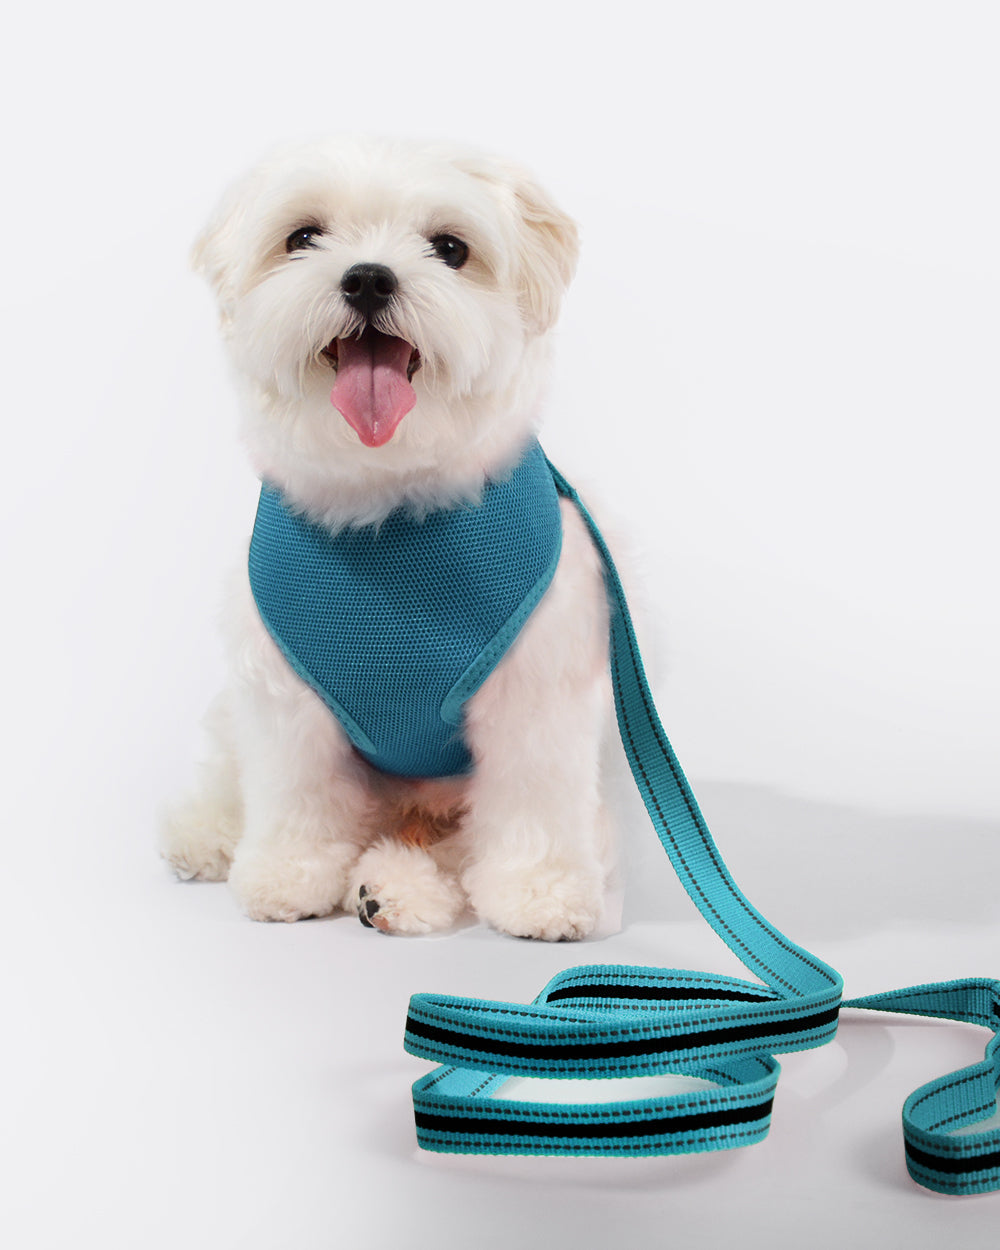 Simply Soft Harness and Leash Set - Mystery Blue